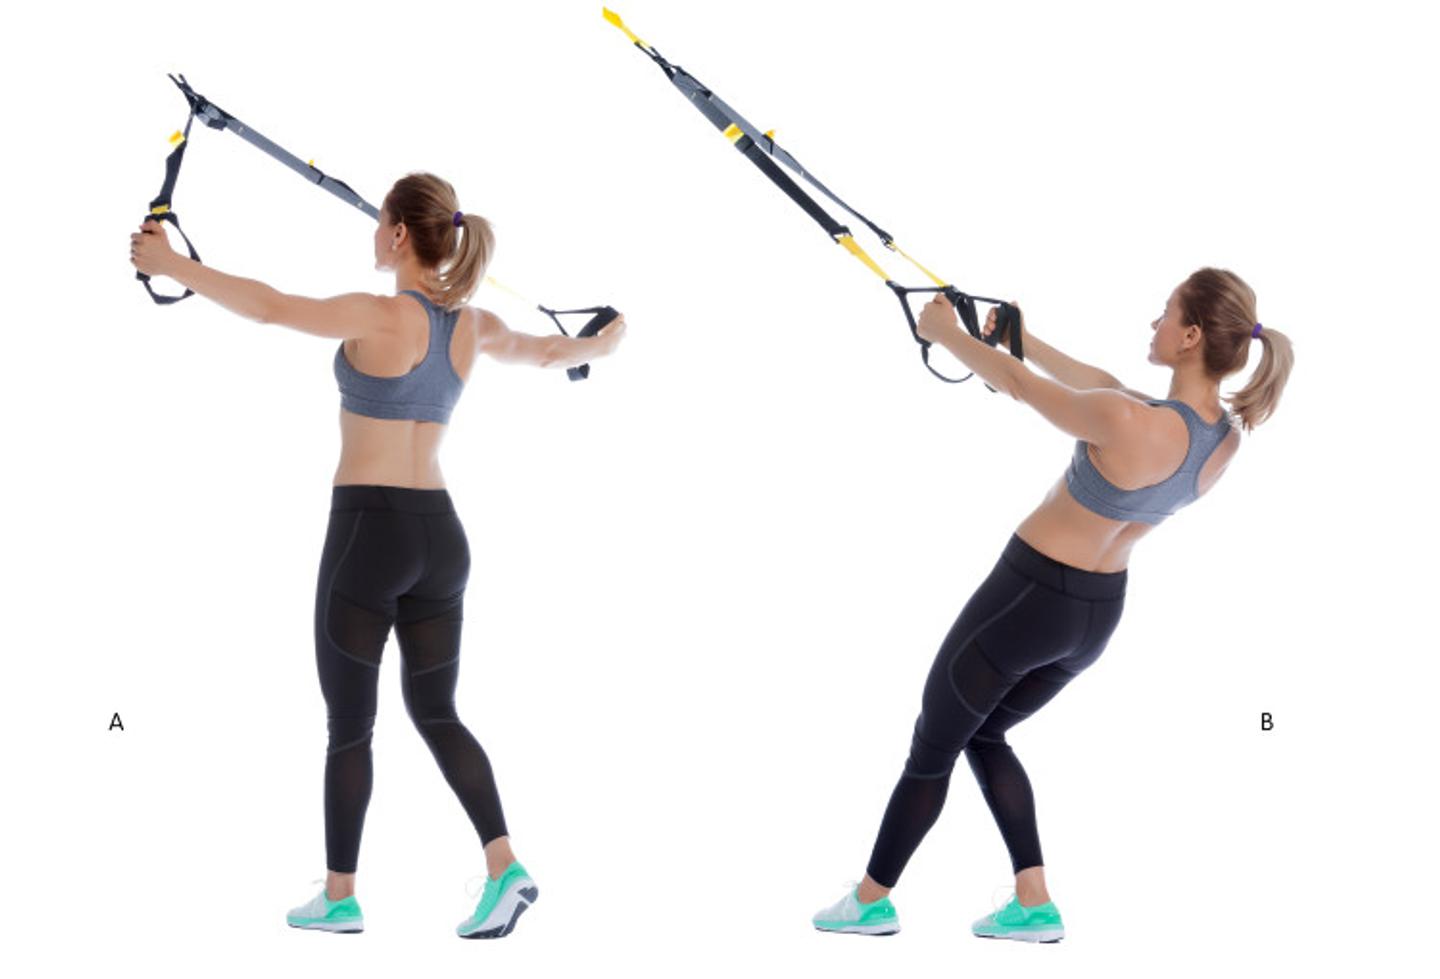 ISSA, International Sports Sciences Association, Certified Personal Trainer, ISSAonline, ISSA x TRX: Best TRX Exercises to Enhance Your Training